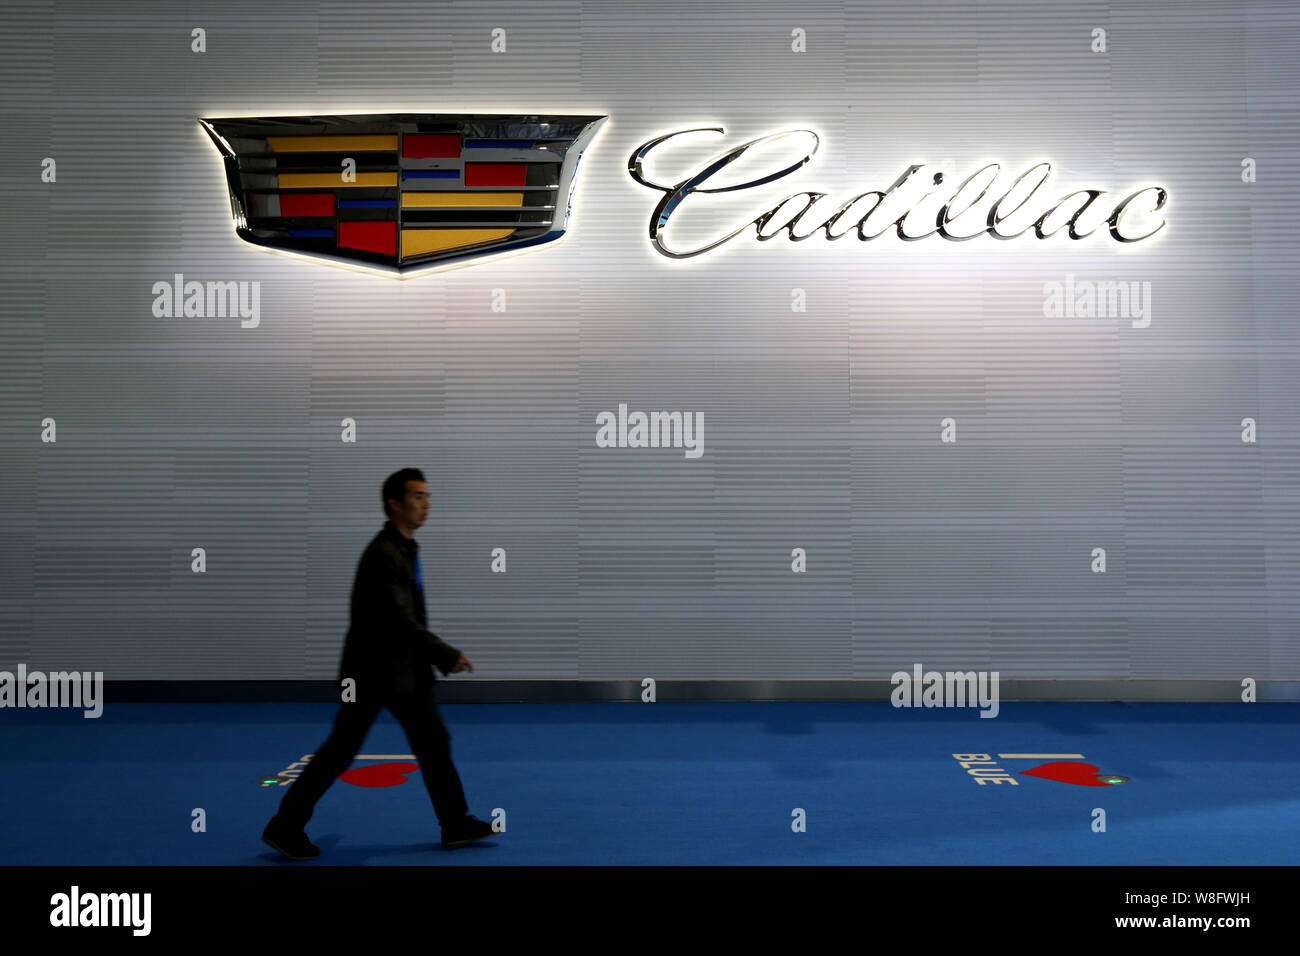 Stand Cadillac High Resolution Stock Photography and Images - Alamy